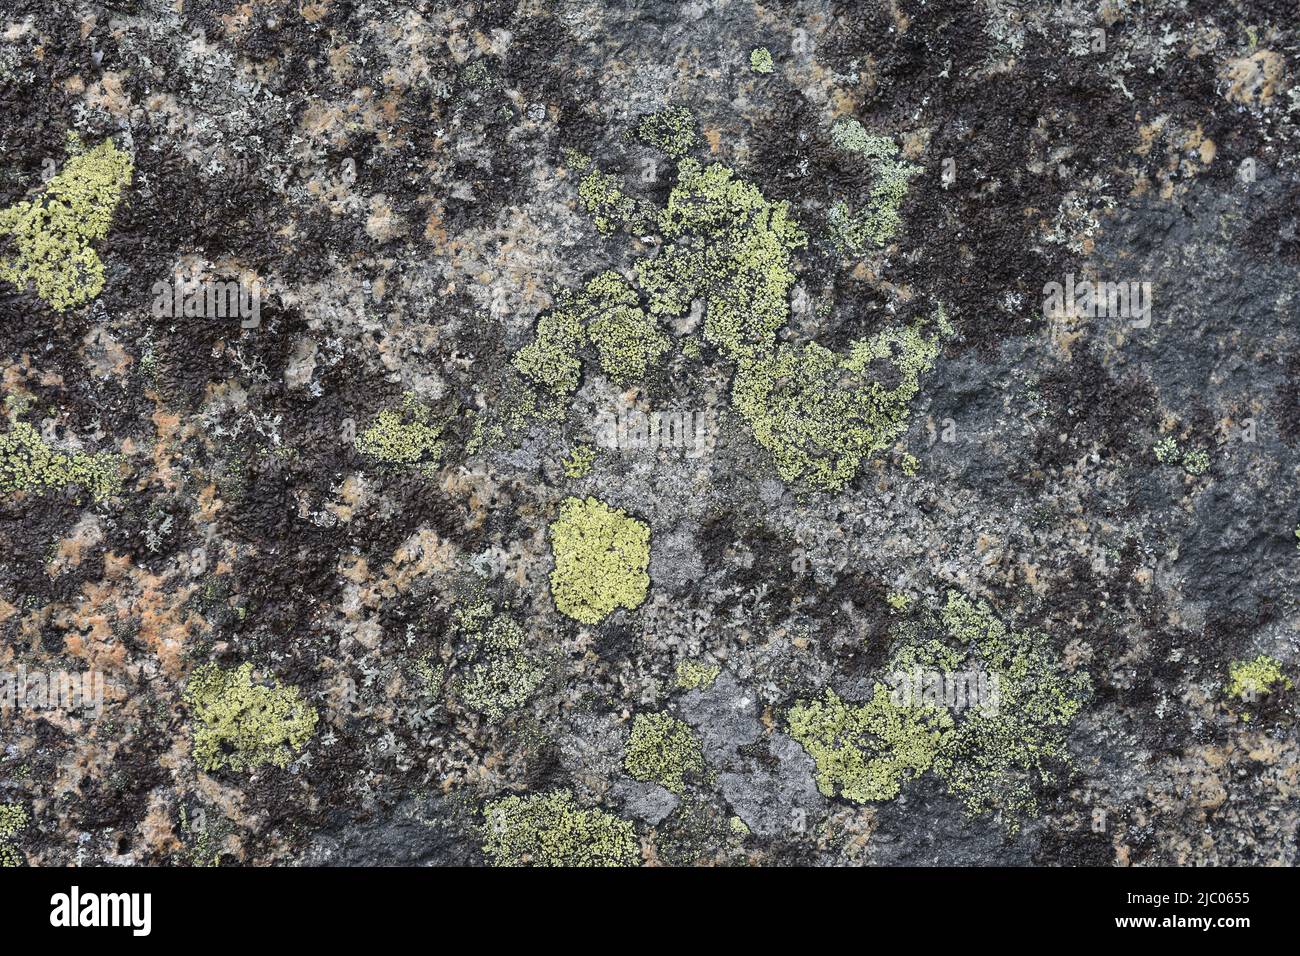 Different types of crustose lichen growing on a stone Stock Photo